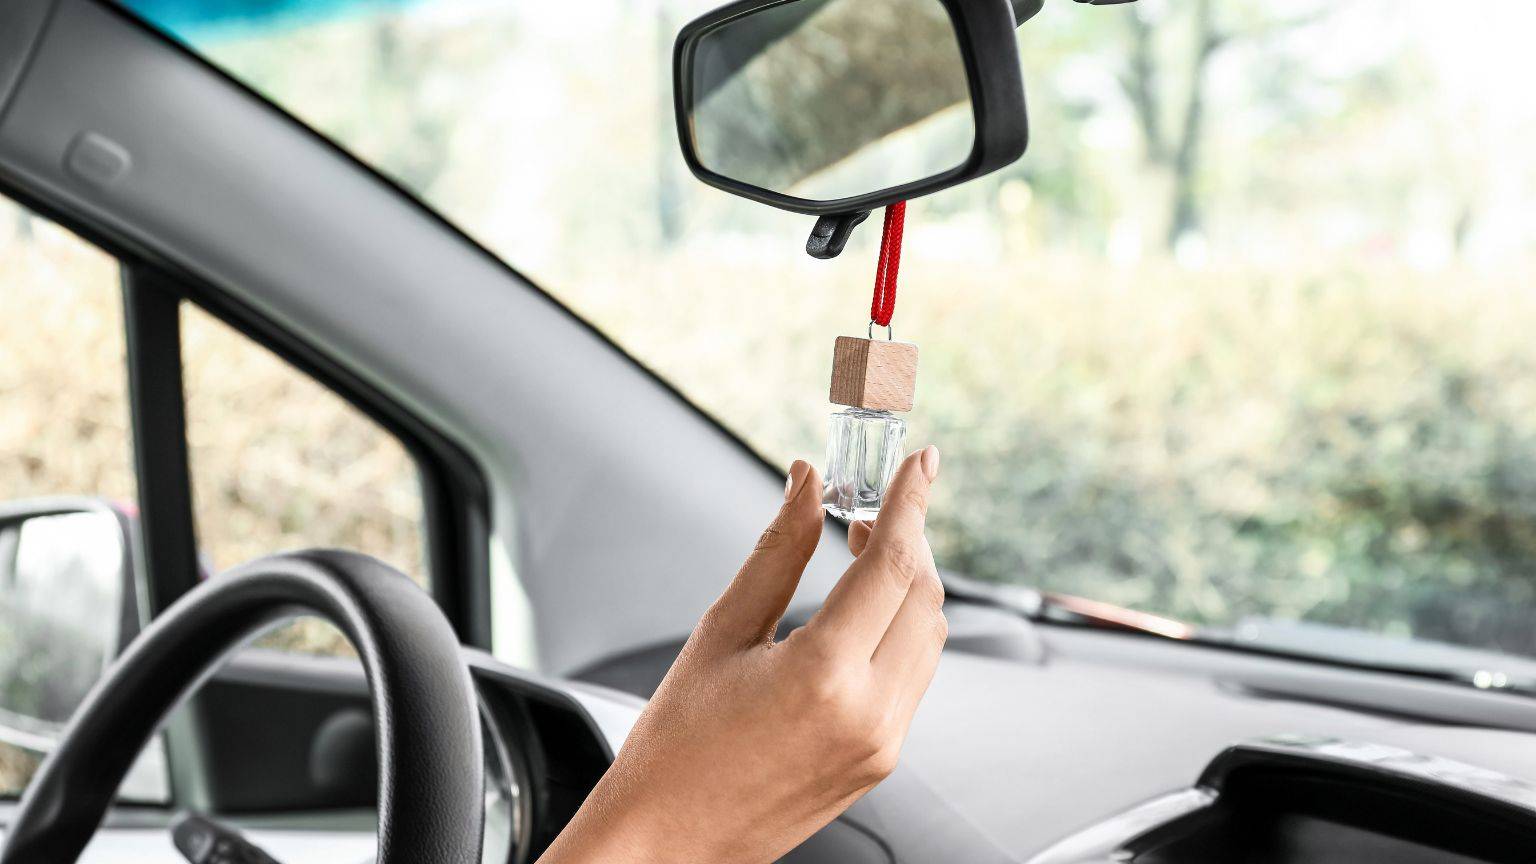 An image of a car interior with a person holding a car air freshener